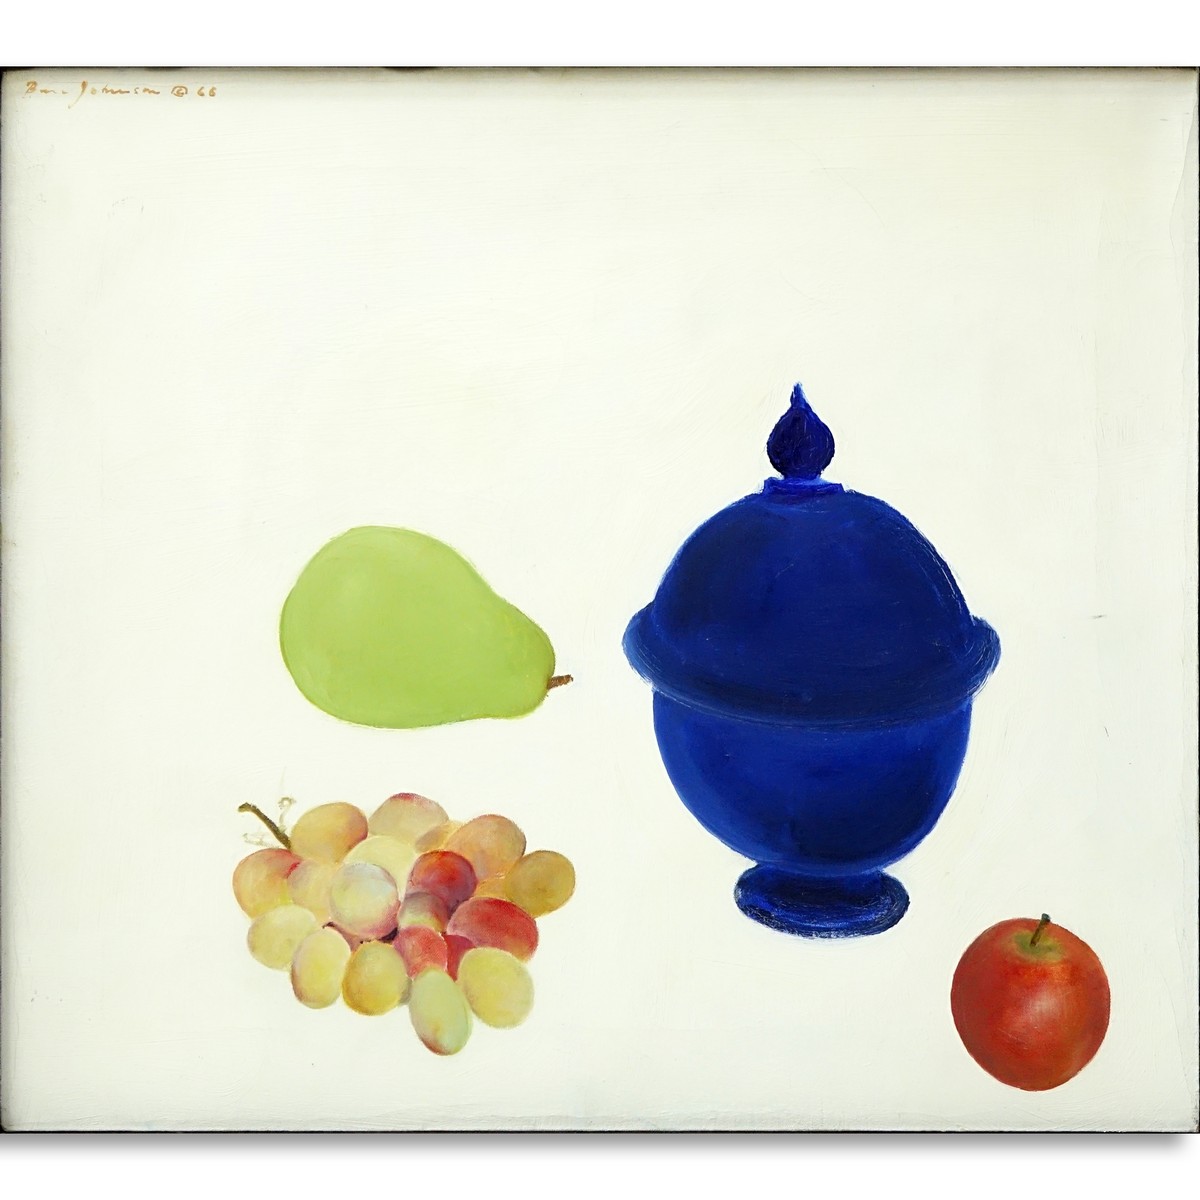 Ben Johnson, American (1902 - 1967) Oil on canvas "Blue Sugar Bowl". Signed upper left, dated '68, Label from Gallery Dache' en verso.